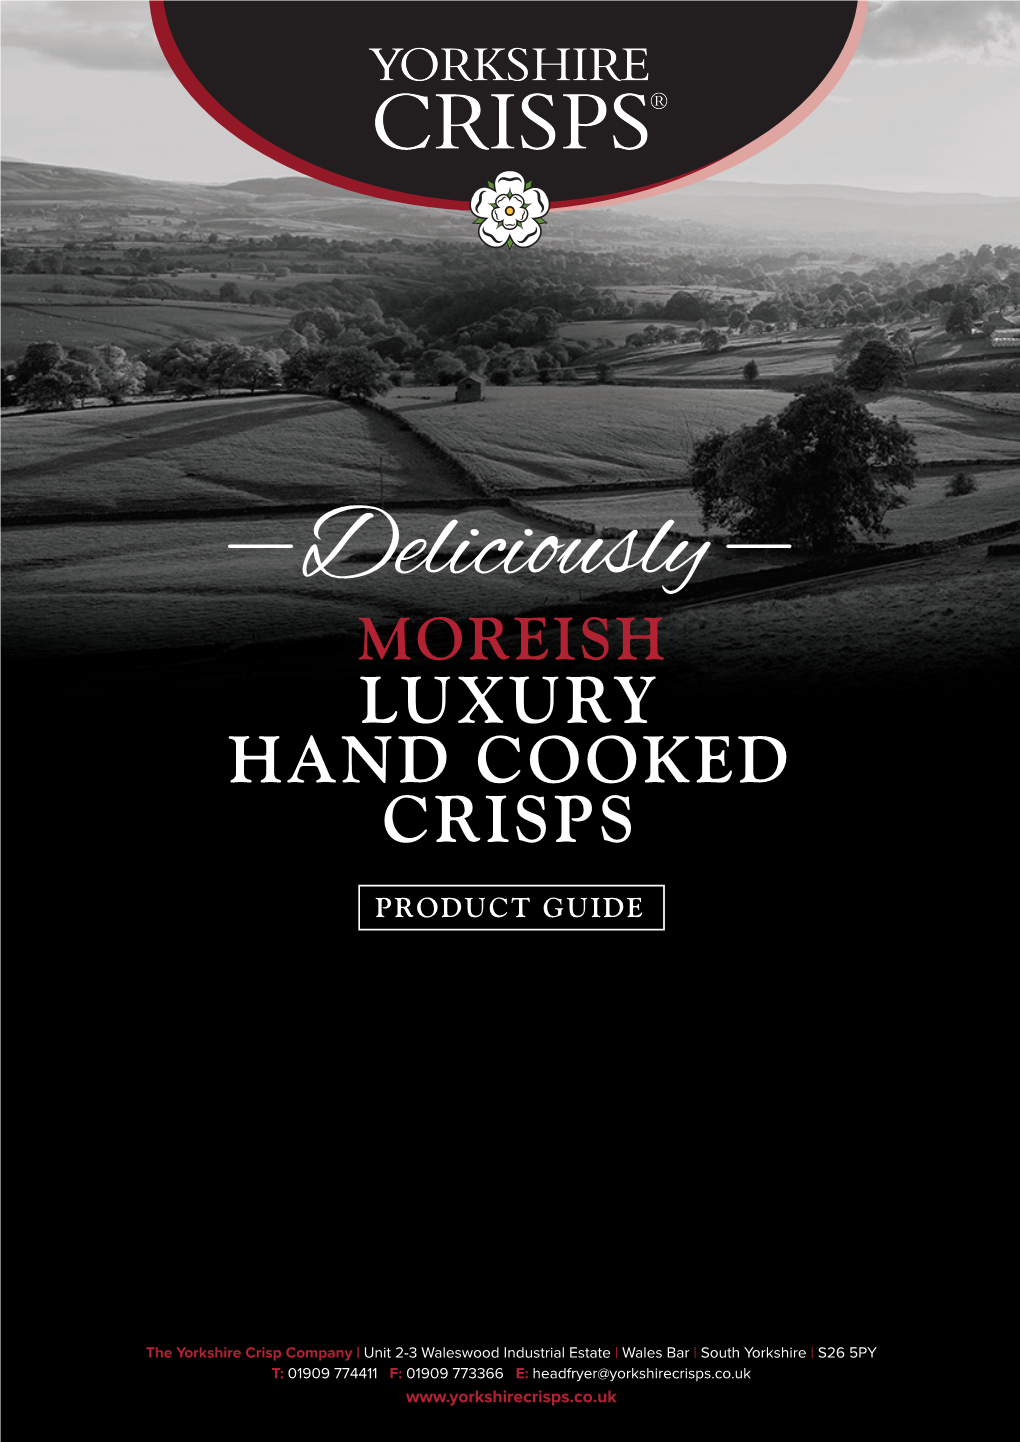 Deliciously MOREISH LUXURY HAND COOKED CRISPS